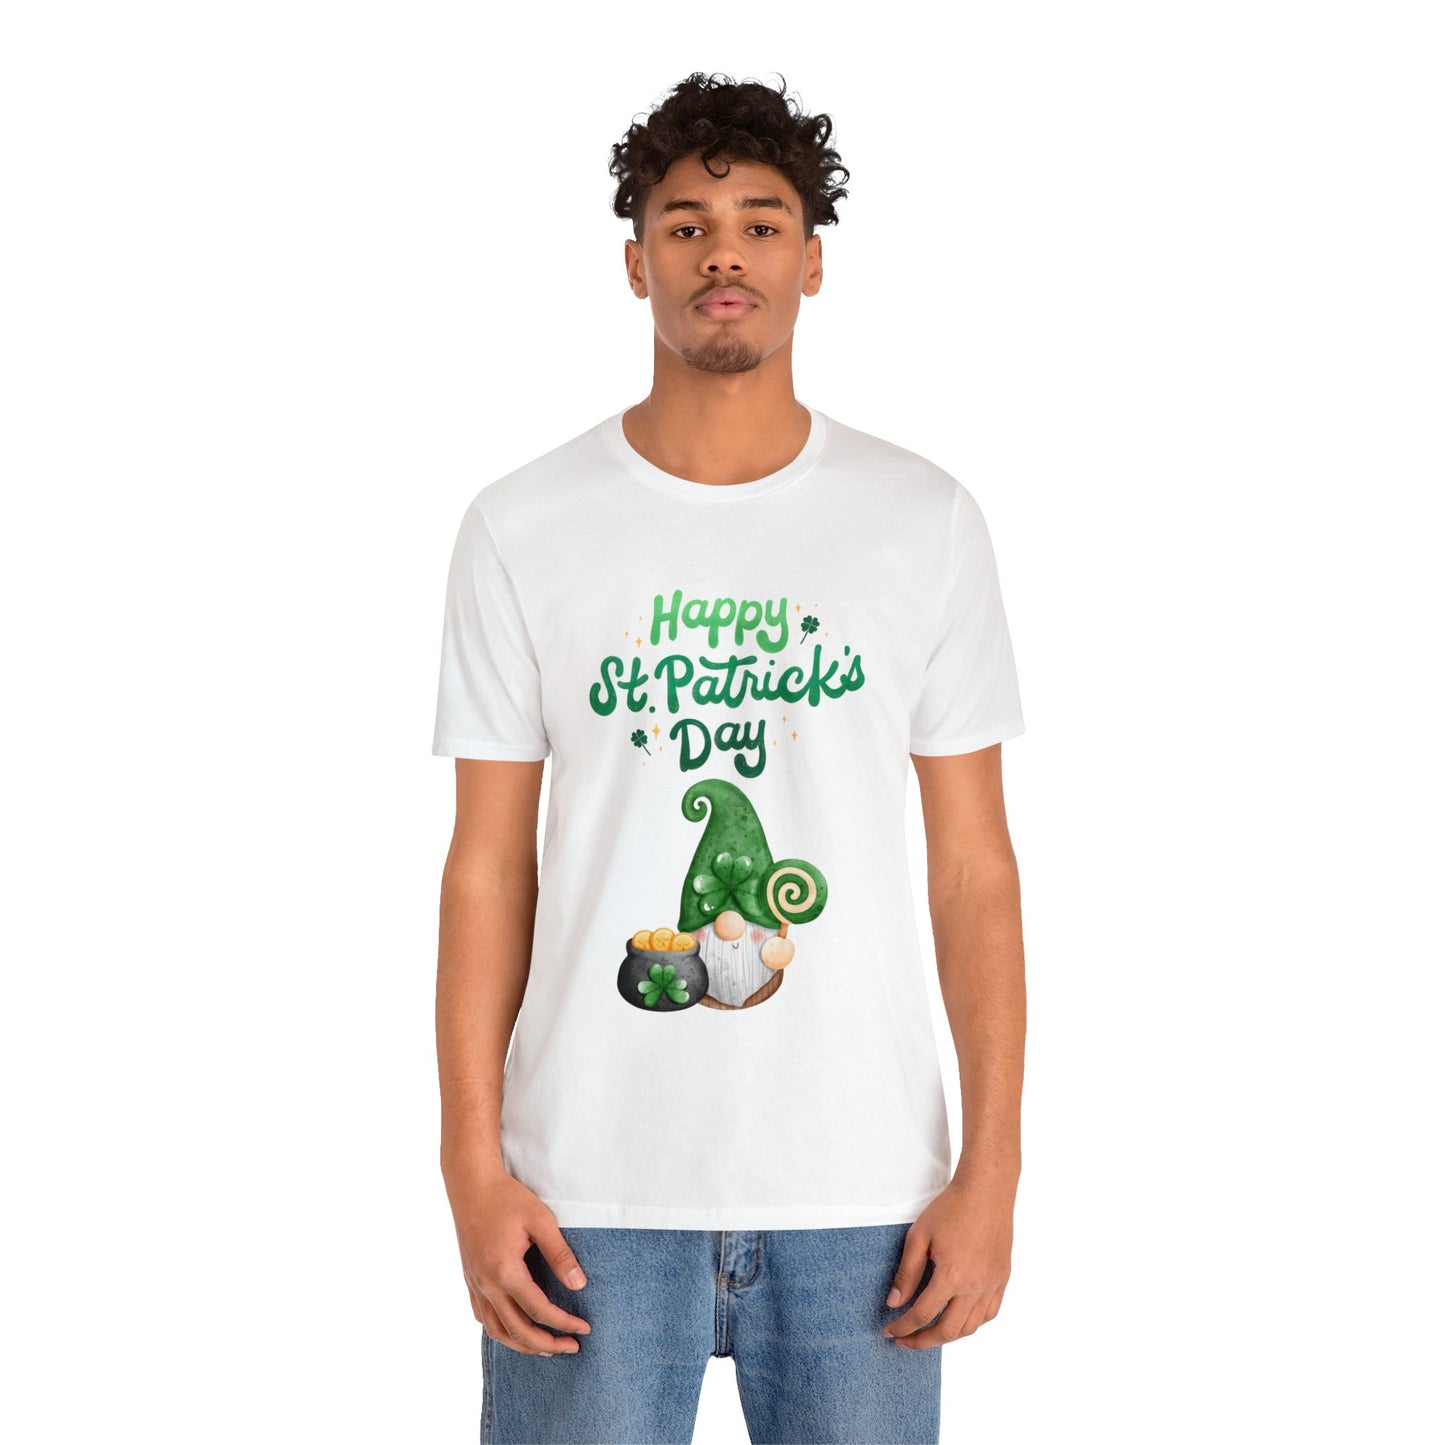 "Happy St Patrick's Day" Gnome Unisex Jersey Short Sleeve Tee, Available in White or Black, Sizes S to 3XL